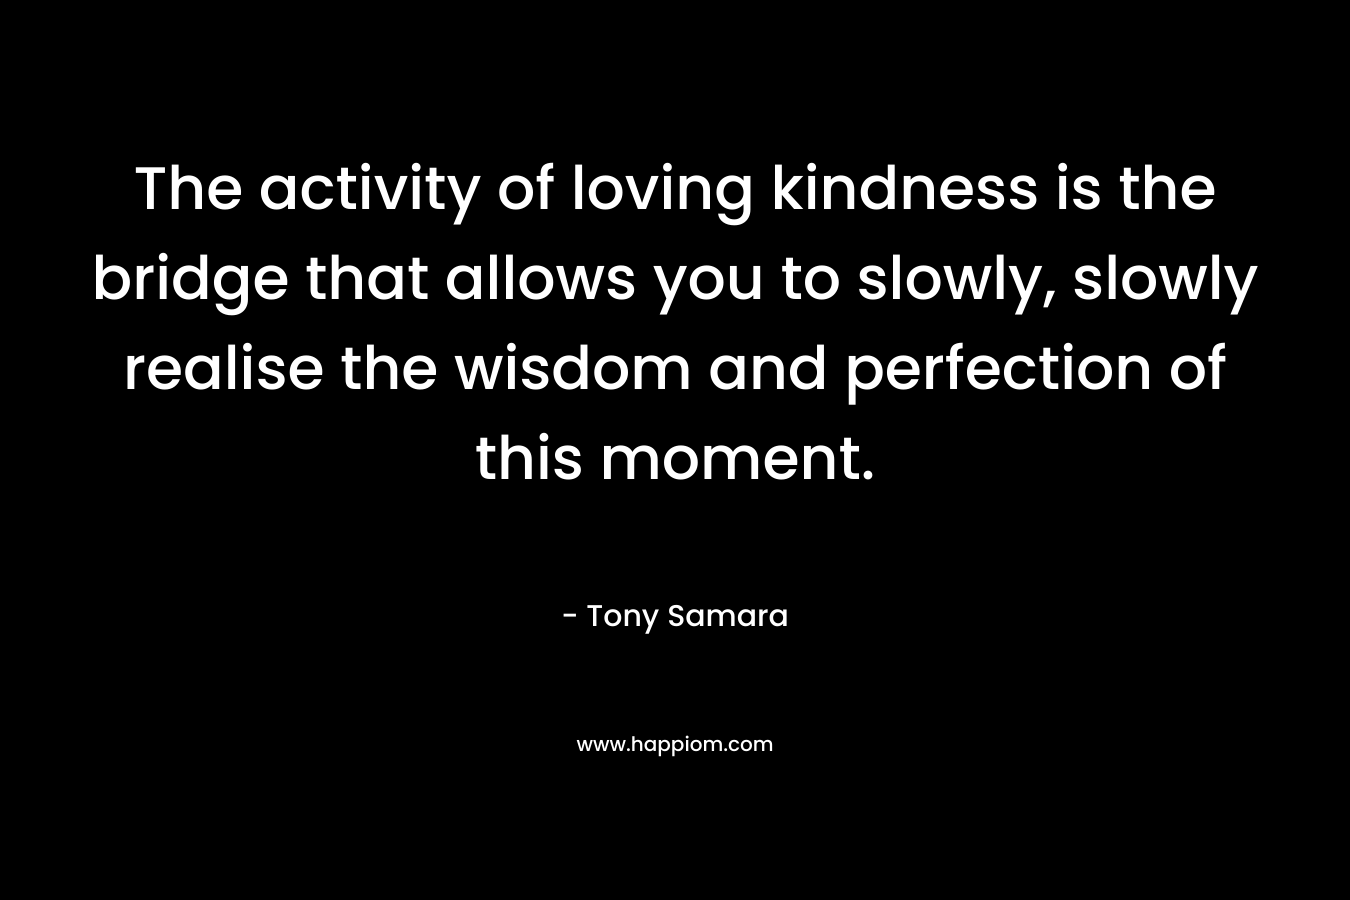 The activity of loving kindness is the bridge that allows you to slowly, slowly realise the wisdom and perfection of this moment.